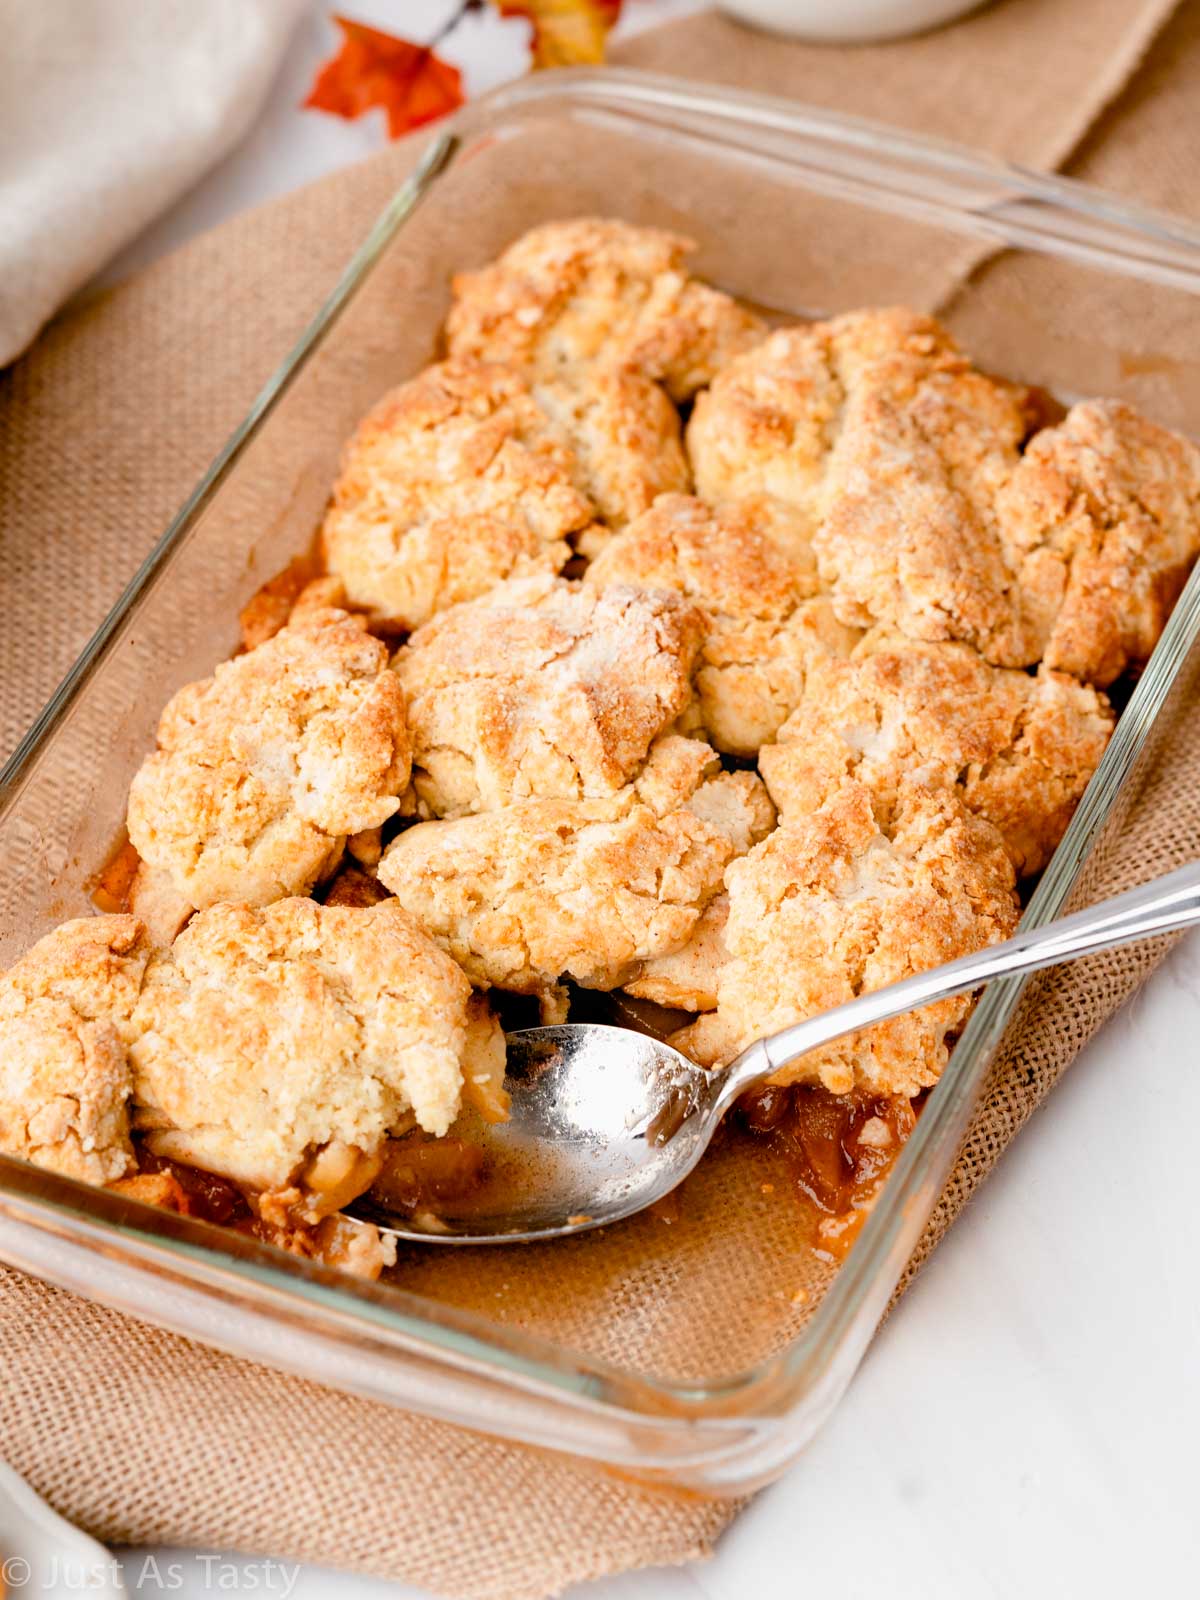 Gluten free apple cobbler in a glass dish with a serving spoon.